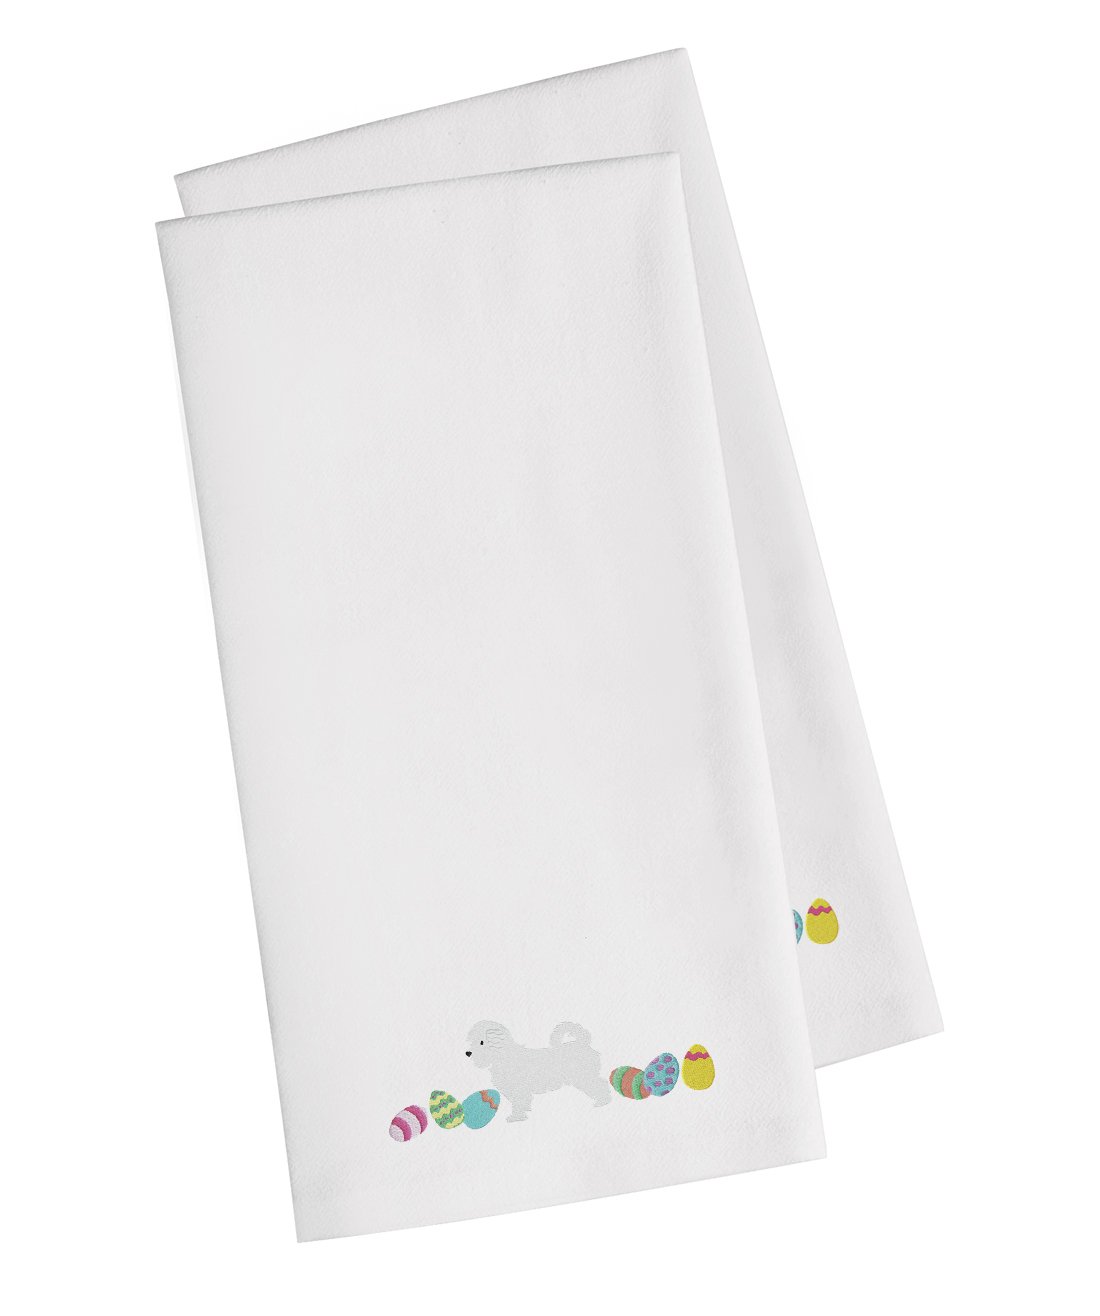 Maltese Easter White Embroidered Kitchen Towel Set of 2 CK1663WHTWE by Caroline's Treasures